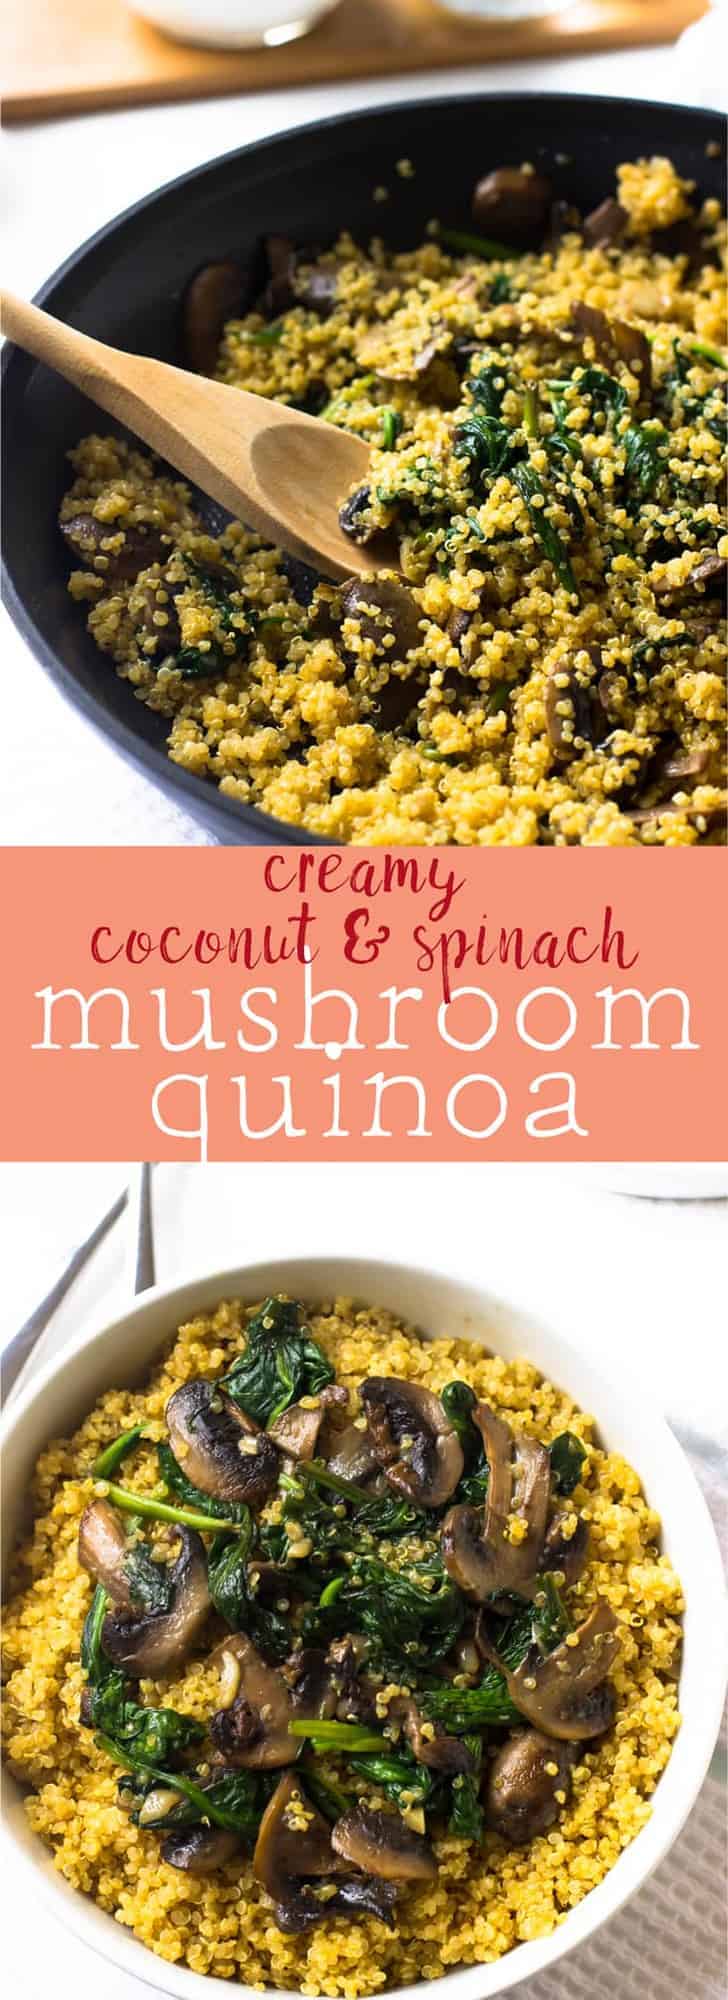 This Creamy Coconut Spinach and Mushroom Quinoa is a delicious 30 minute dish that is incredibly nutritious with 7 servings of vegetables! via https://jessicainthekitchen.com